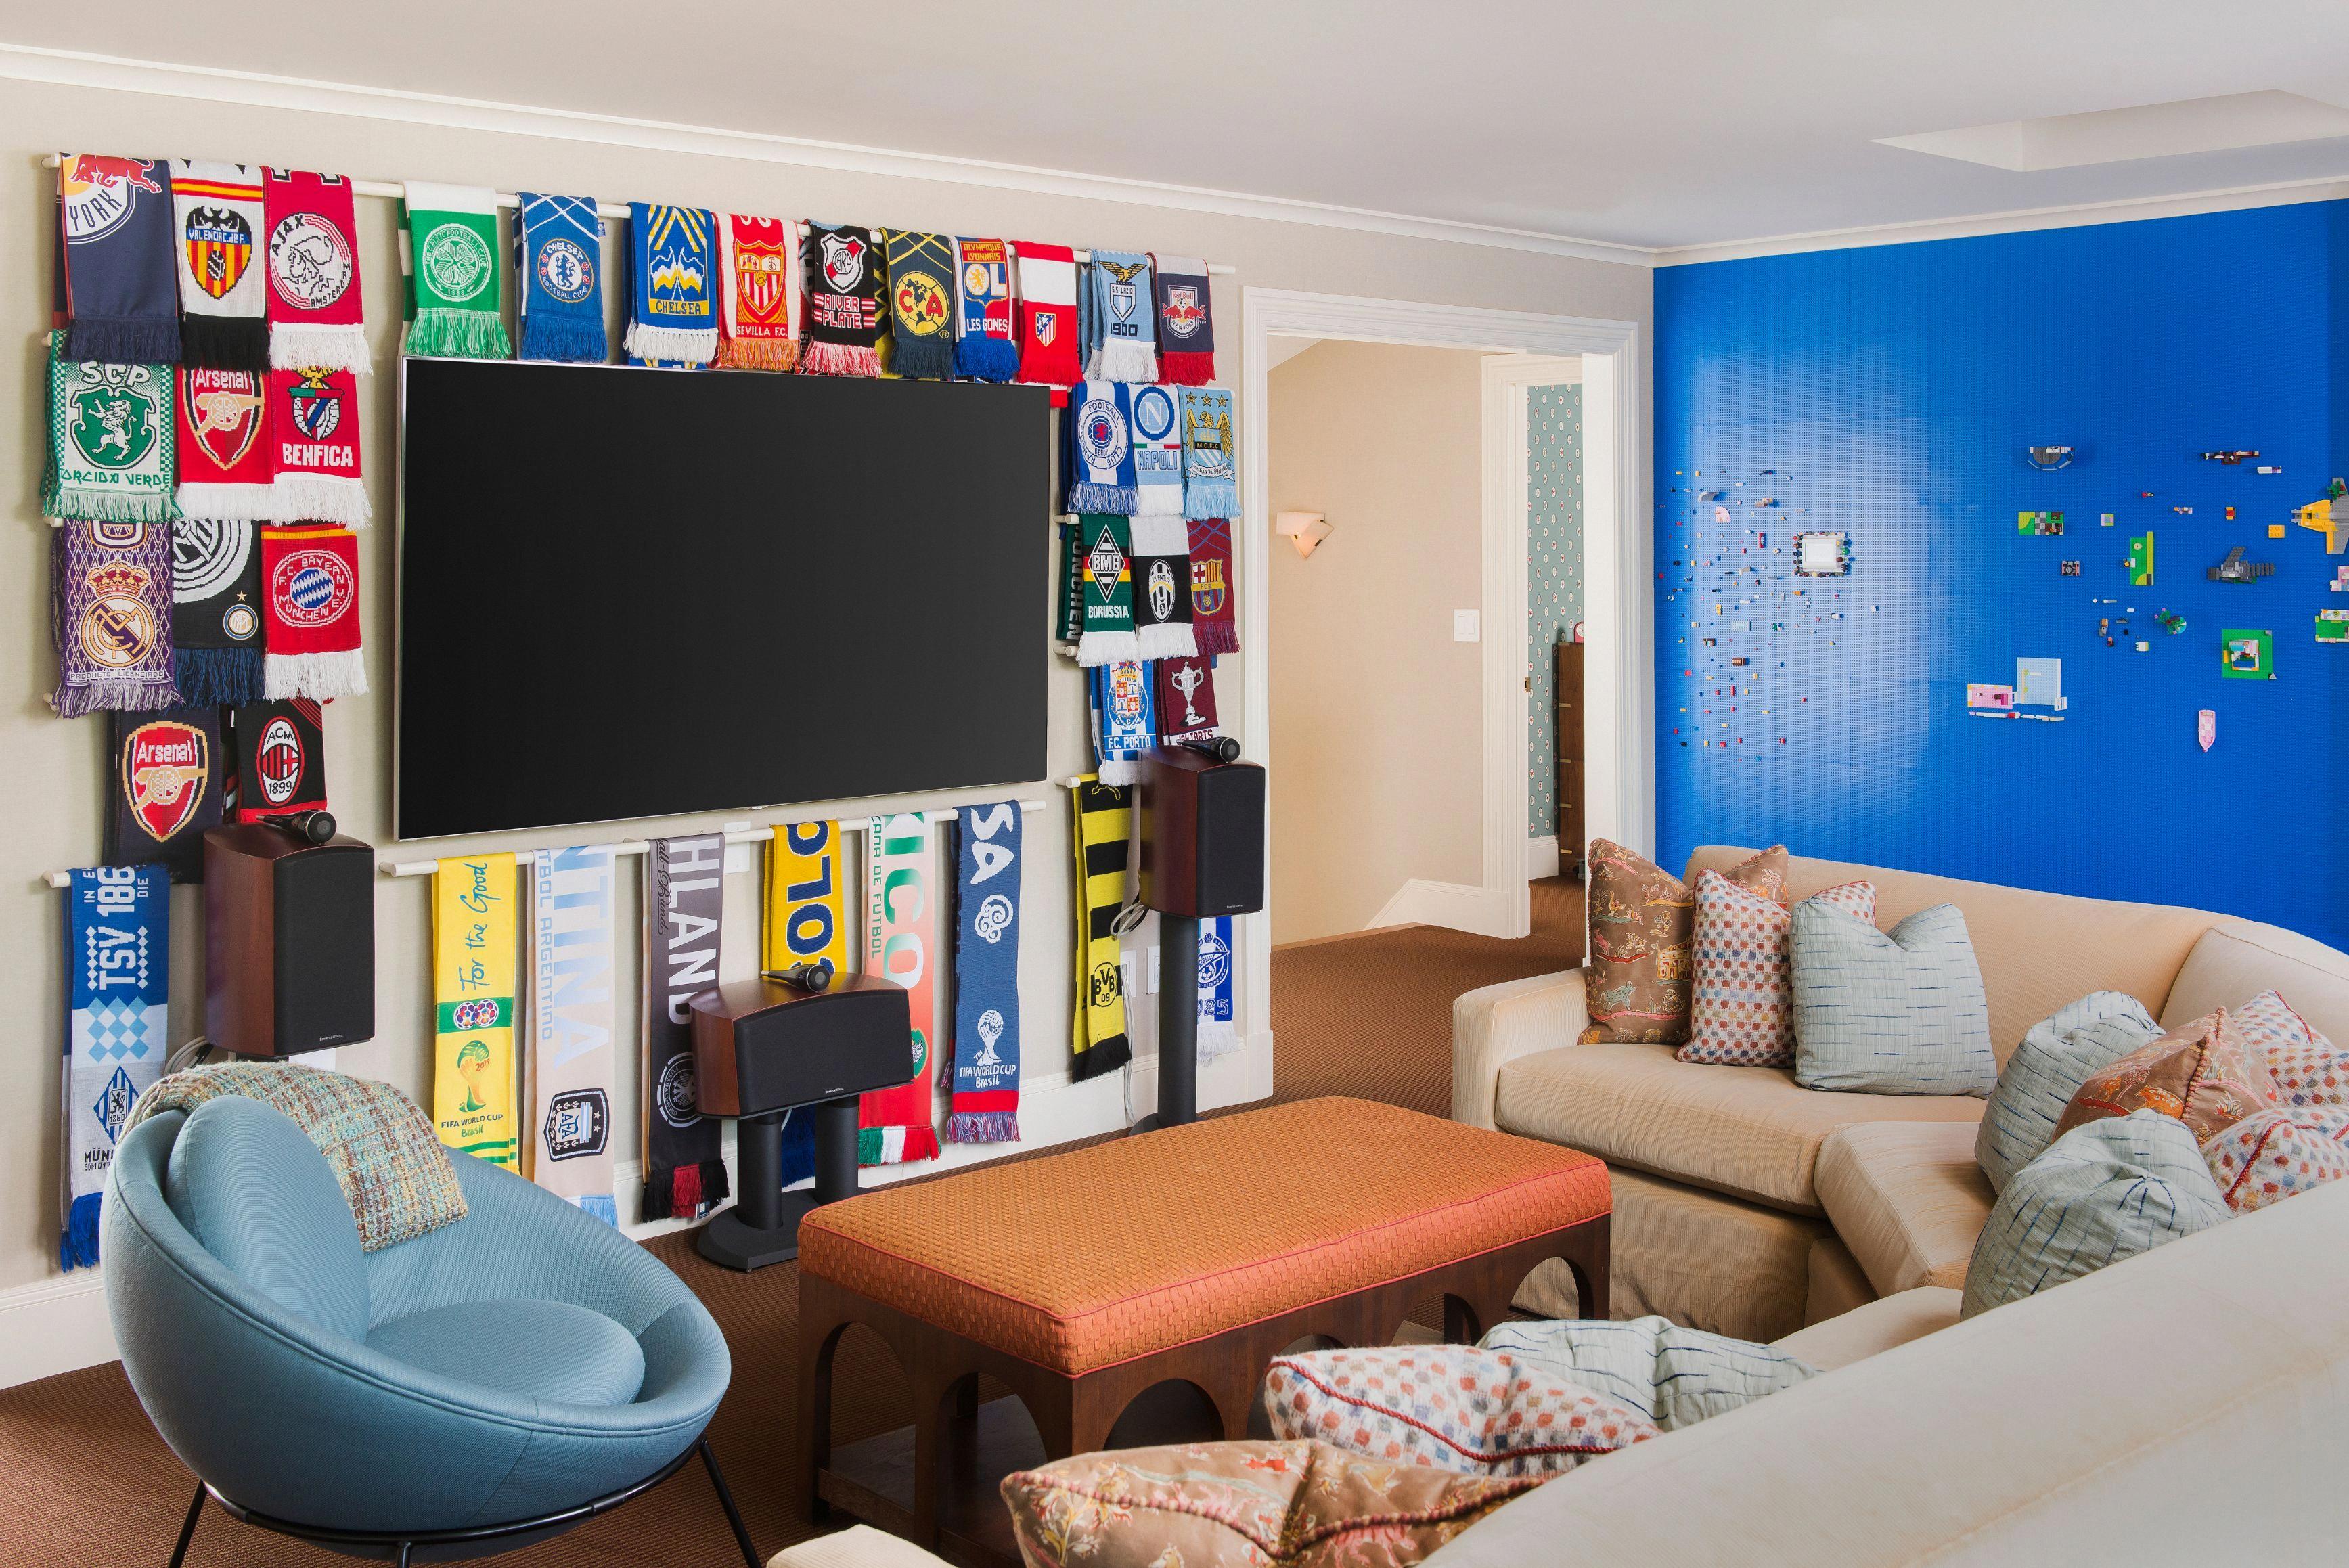 How to Choose the Right TVs Model for Kids' Rooms? 19